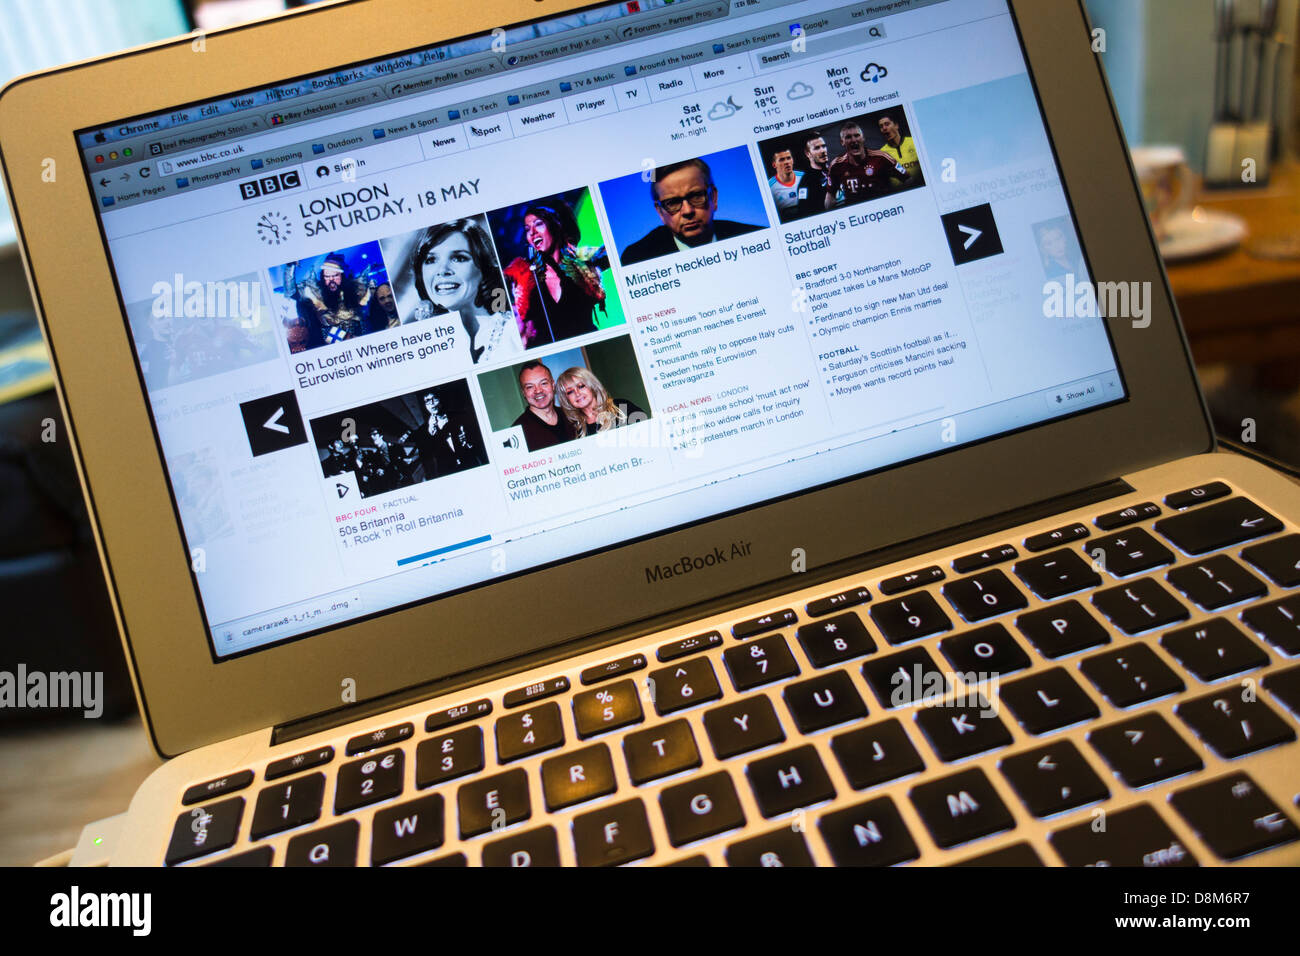 A close up of an Apple MacBook Air Laptop Computer on the BBC homepage Stock Photo